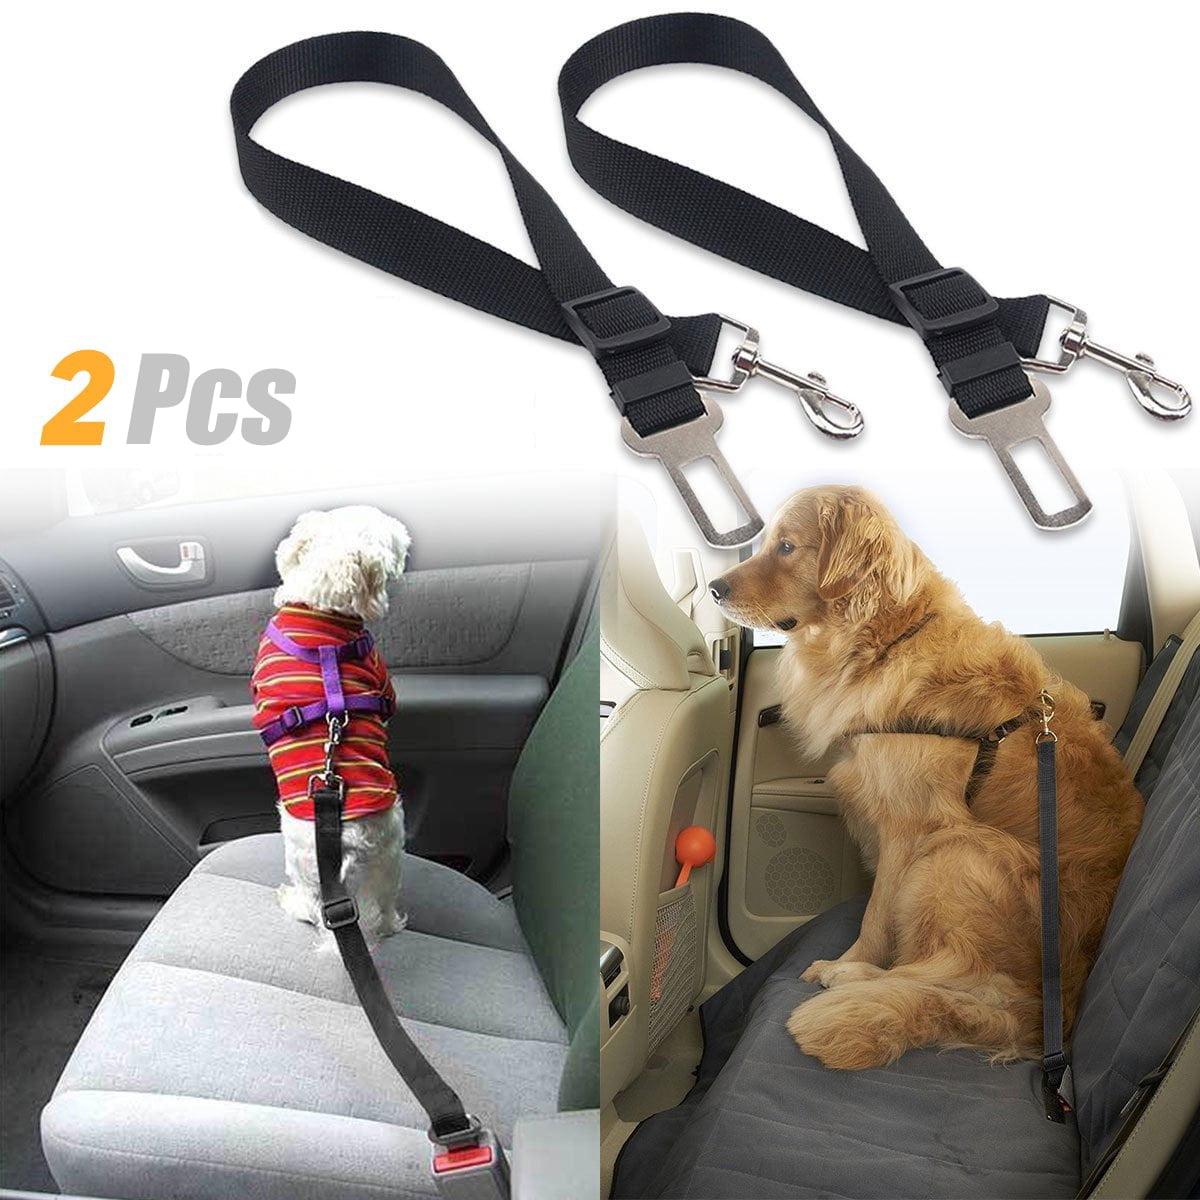 Cotcool 2 Pack Adjustable Elastic Durable Nylon Pet Dog Car Safety Belt Cat Seat Belt Pet Puppy Safety Leash Leads Car Vehicle Seat Belt for Dogs,Cats and Pets 